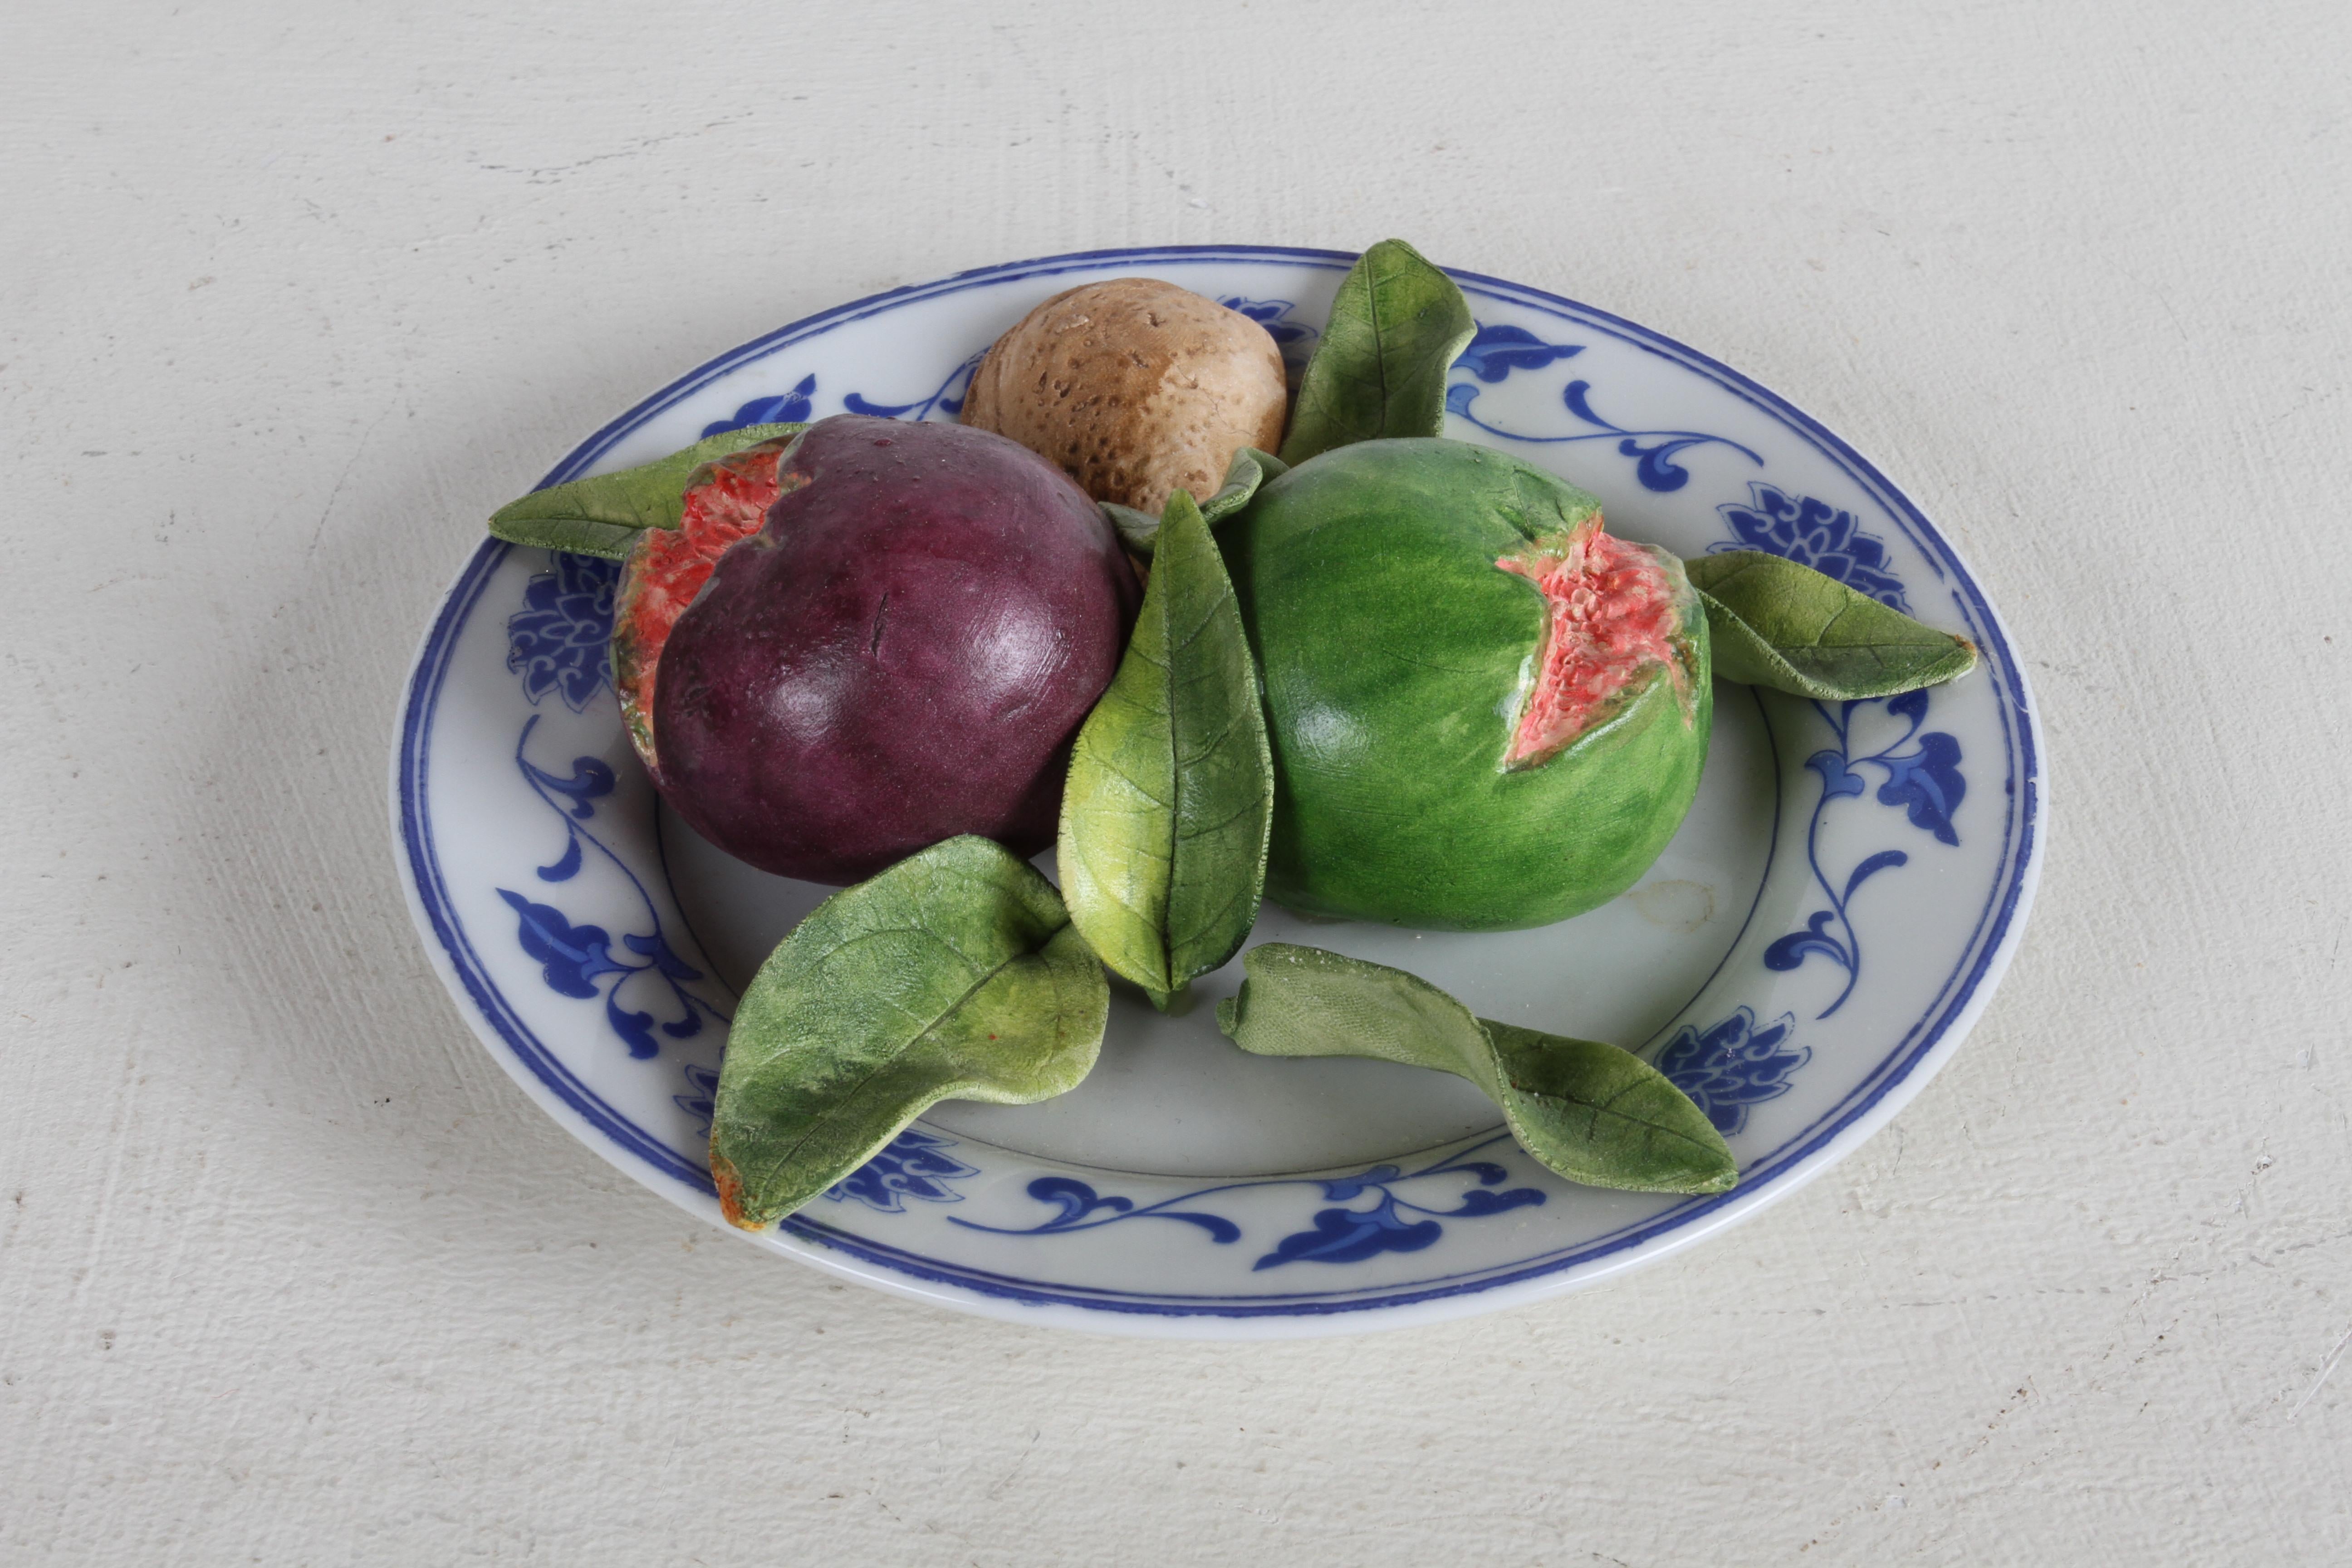 Christine Viennet France Trompe L'oeil Hand Crafted Art Plate - Star Apple Fruit In Good Condition For Sale In St. Louis, MO